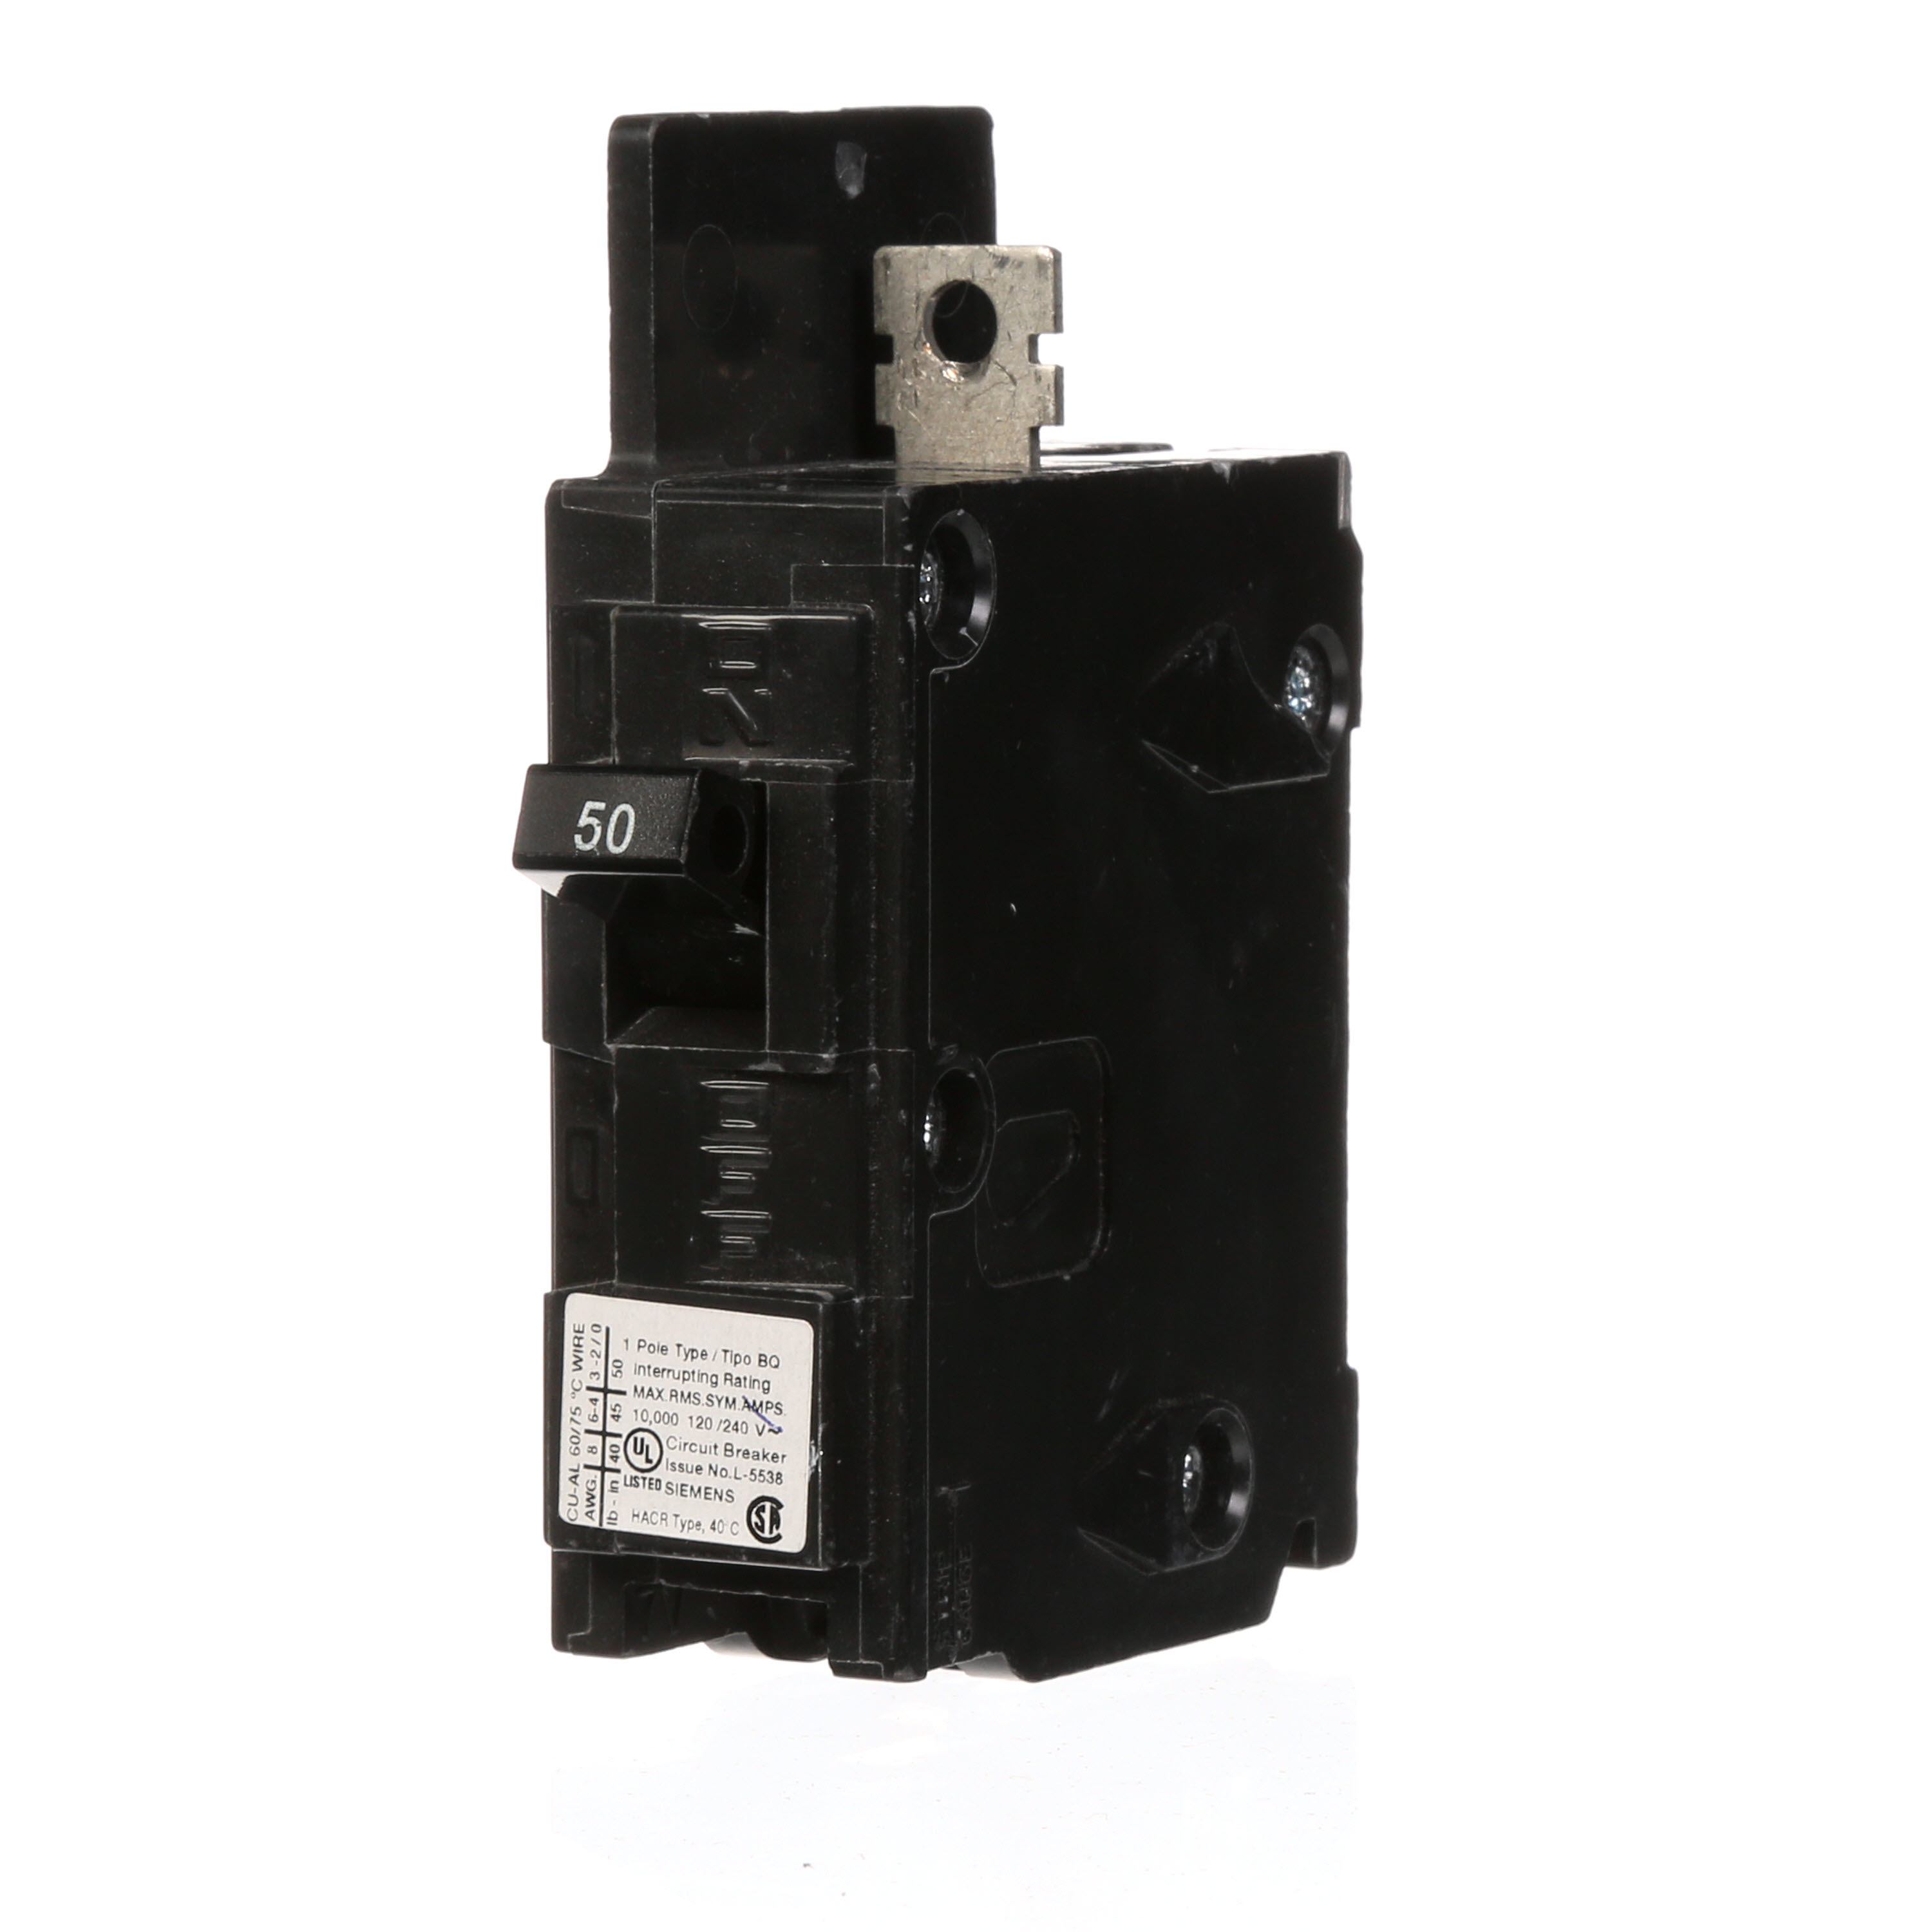 Siemens Low Voltage Molded Case Circuit Breakers General Purpose MCCBs are Circuit Protection Molded Case Circuit Breakers. 1-Pole circuit breaker type BQ. Rated 120V (050A) (AIR 10 kA). Special features Load side lugs are included.